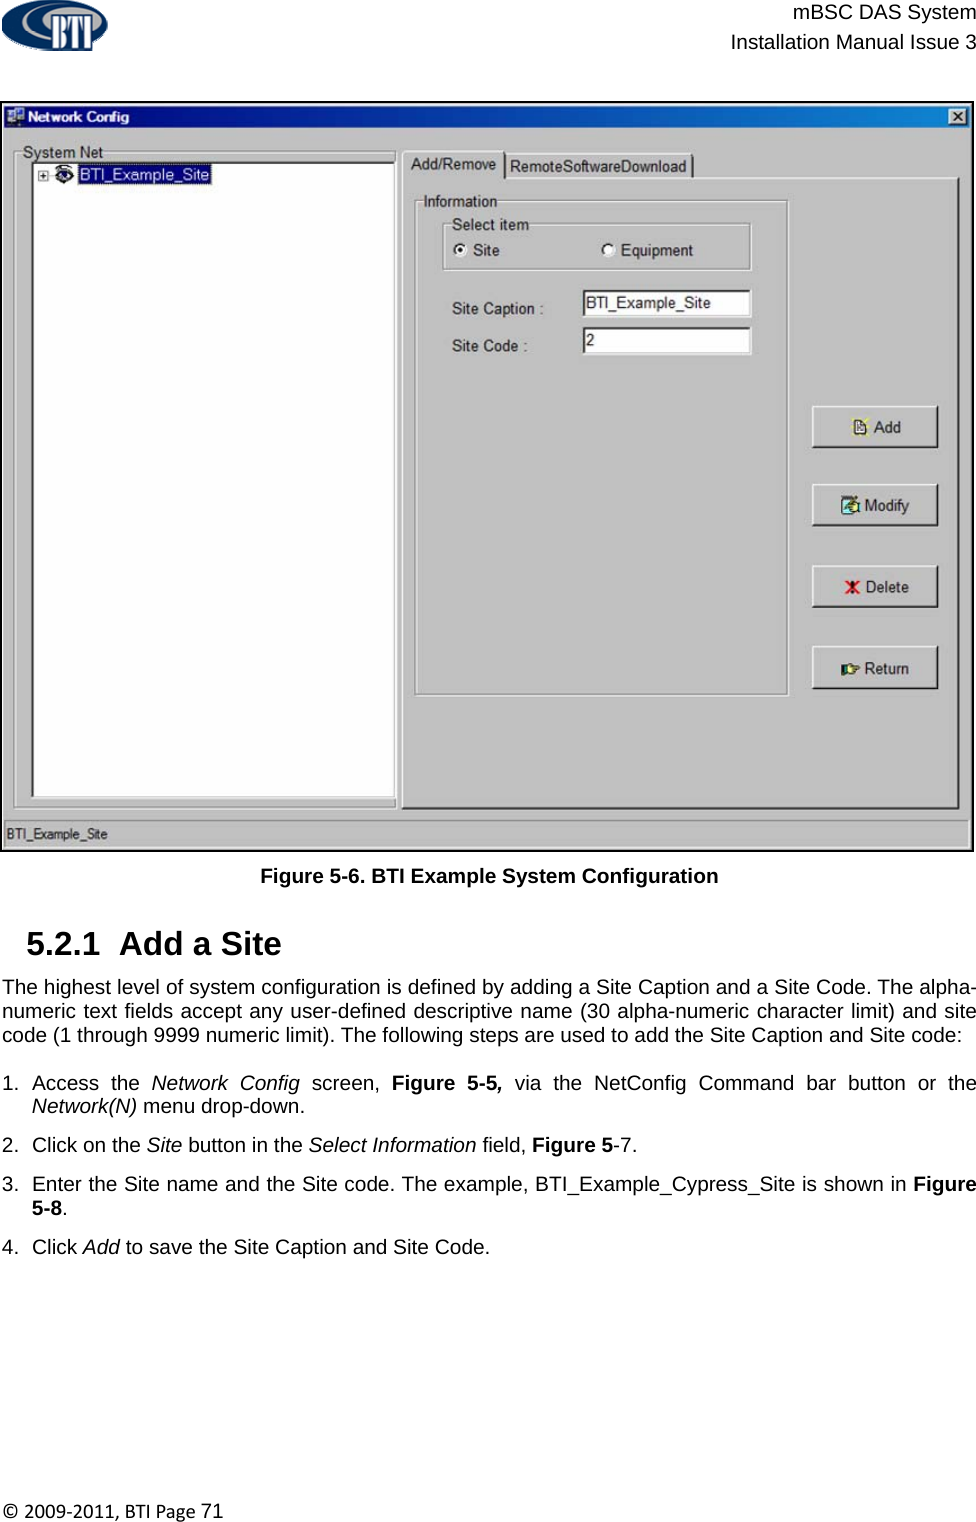                          mBSC DAS System  Installation Manual Issue 3  ©2009‐2011,BTIPage71  Figure 5-6. BTI Example System Configuration   5.2.1  Add a Site The highest level of system configuration is defined by adding a Site Caption and a Site Code. The alpha-numeric text fields accept any user-defined descriptive name (30 alpha-numeric character limit) and site code (1 through 9999 numeric limit). The following steps are used to add the Site Caption and Site code:  1. Access the Network Config screen, Figure 5-5, via the NetConfig Command bar button or the Network(N) menu drop-down. 2.  Click on the Site button in the Select Information field, Figure 5-7. 3.  Enter the Site name and the Site code. The example, BTI_Example_Cypress_Site is shown in Figure 5-8. 4. Click Add to save the Site Caption and Site Code. 